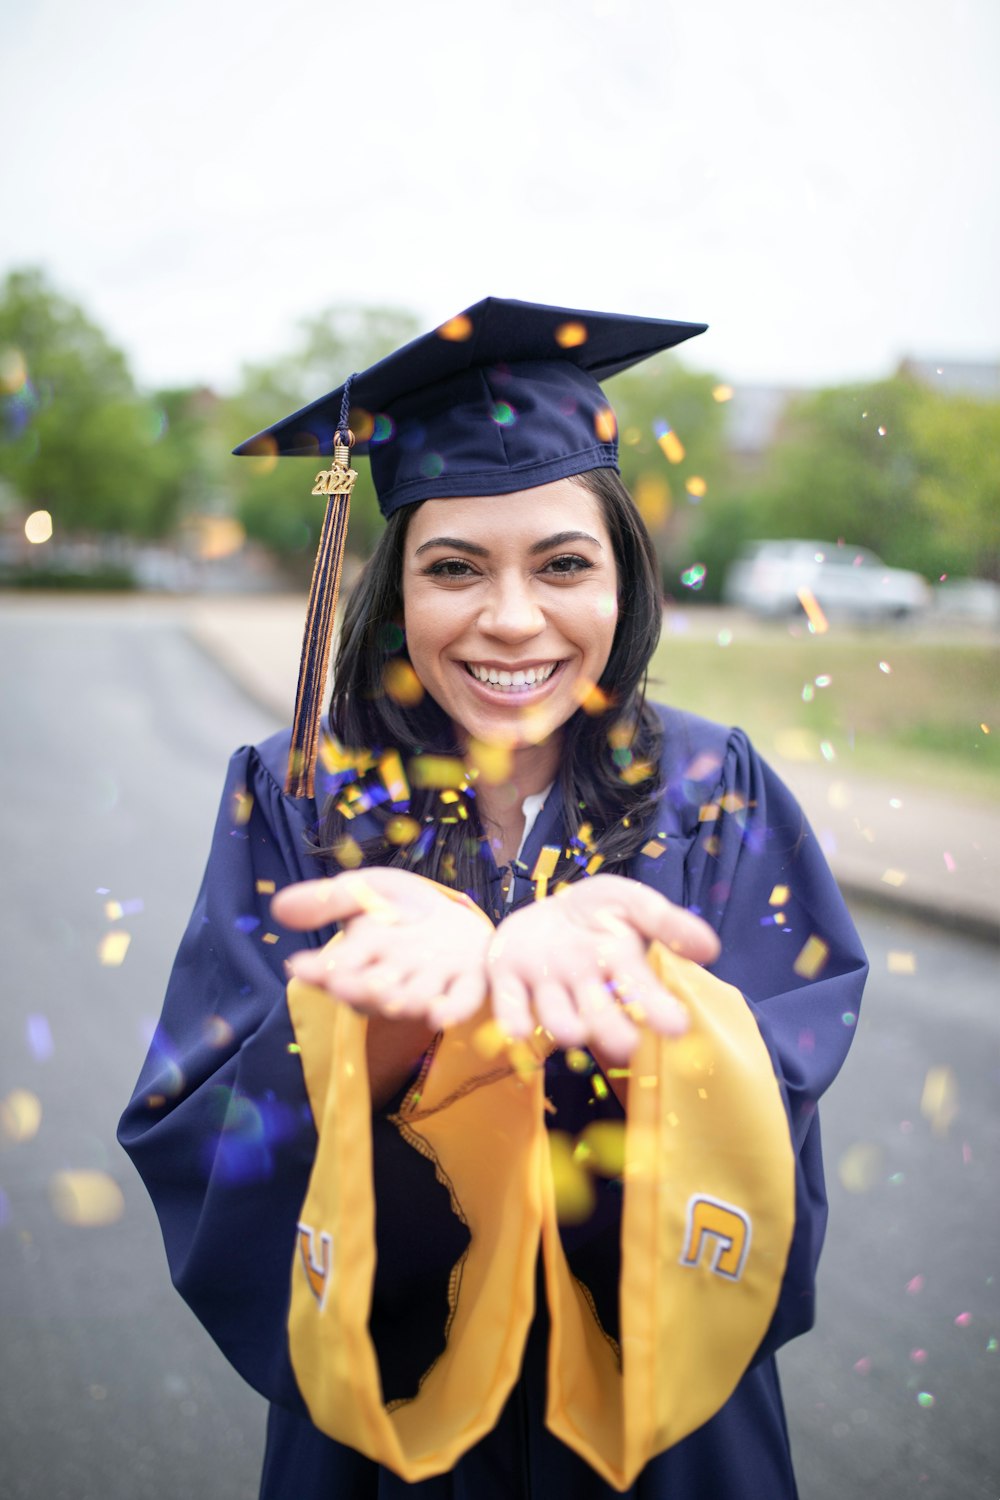 a woman in a graduation cap and gown throwing confetti